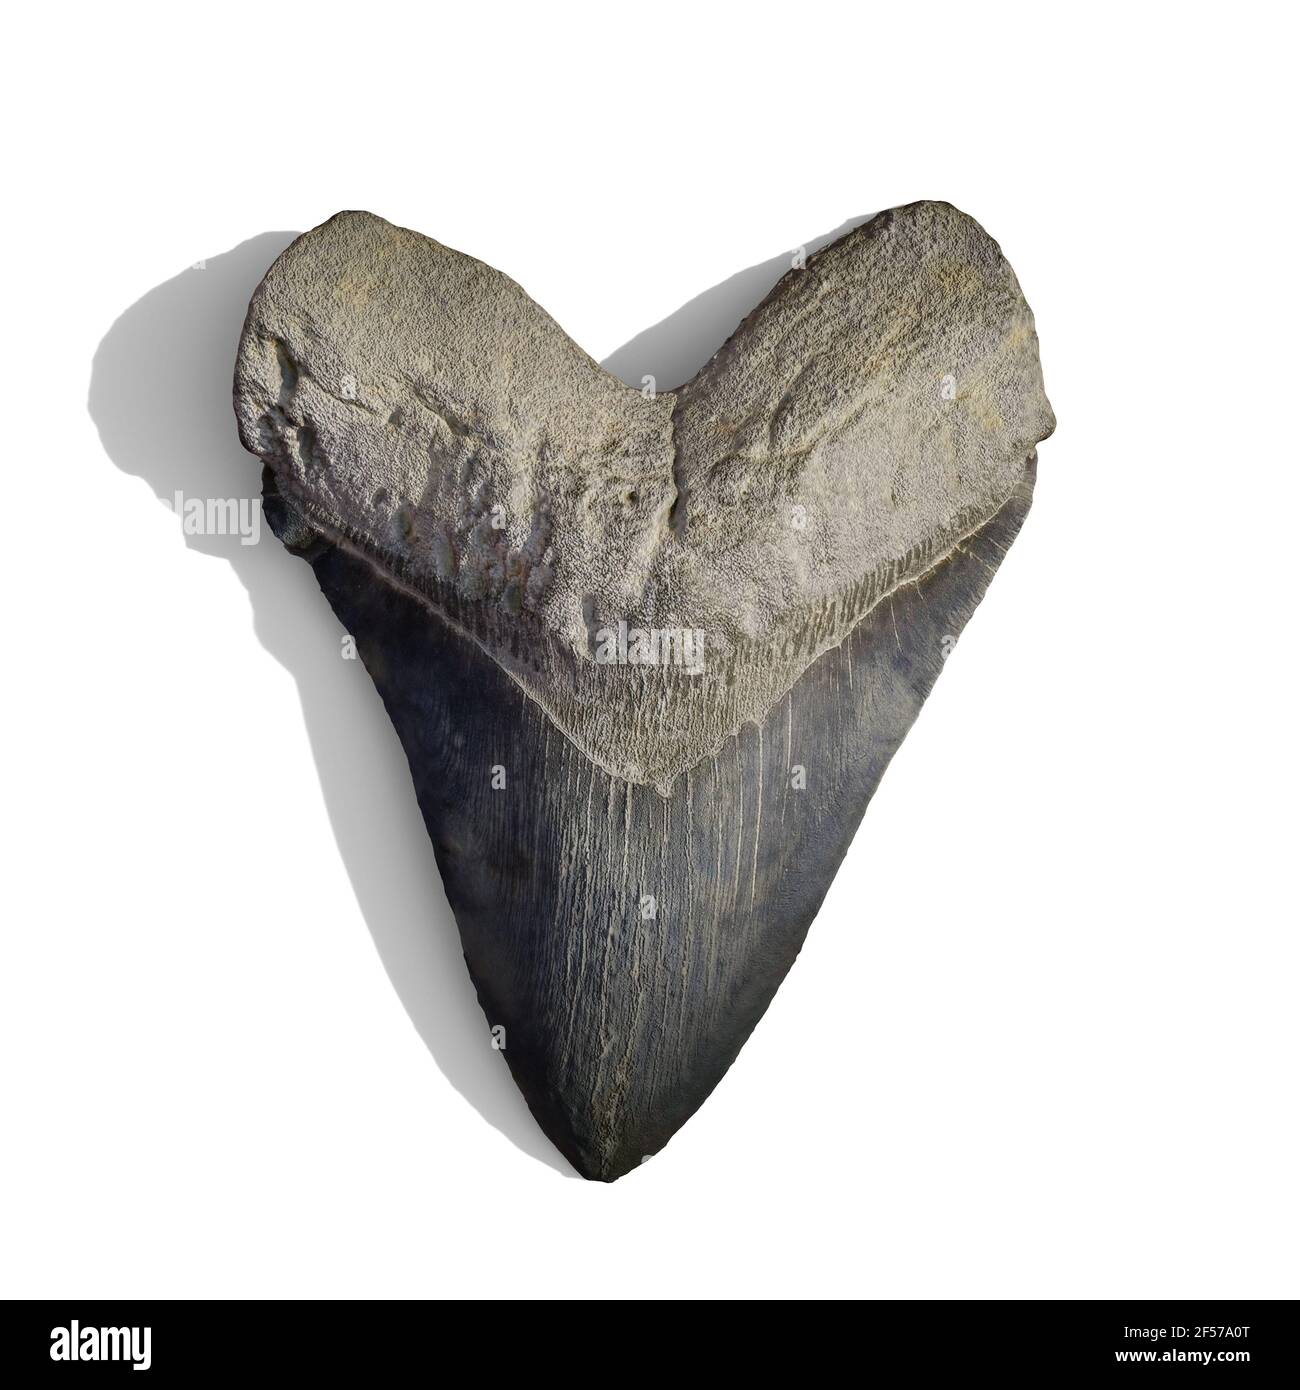 Megalodon shark tooth fossilized, isolated with shadow on white background Stock Photo